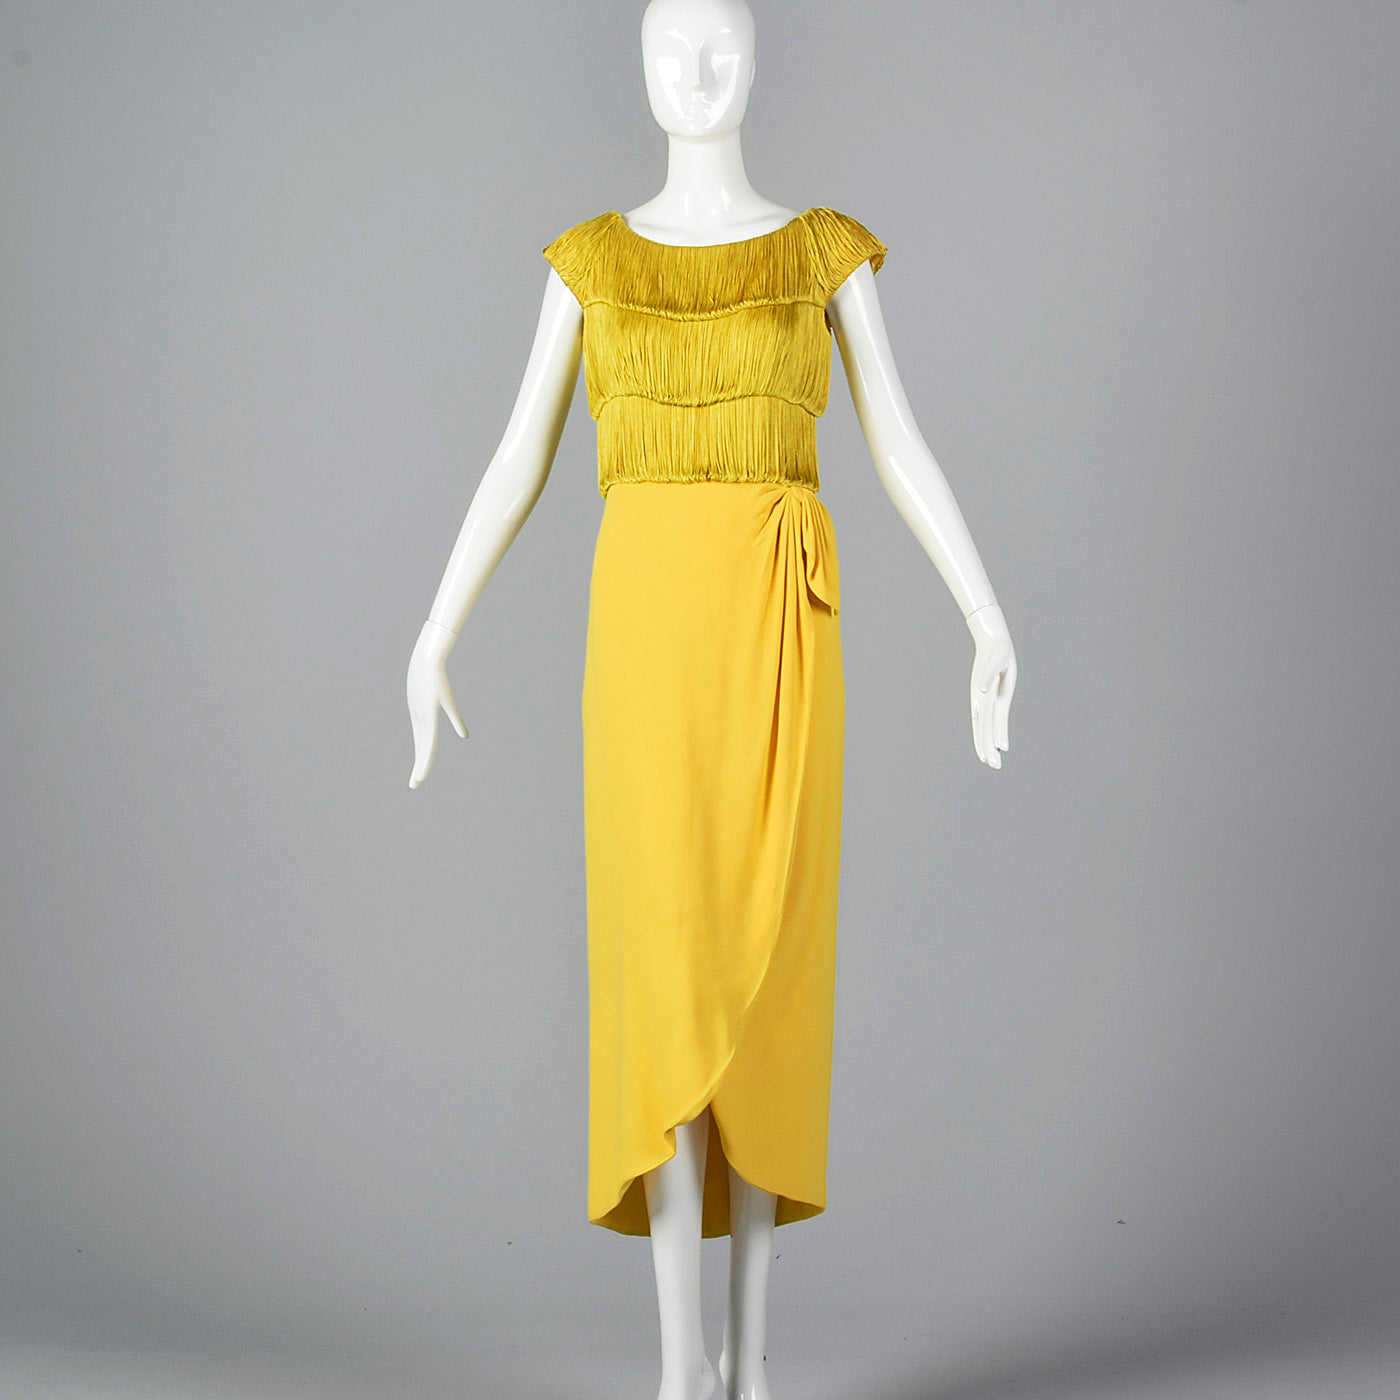 1960s Bright Yellow Cocktail Dress with Fringe Bodice